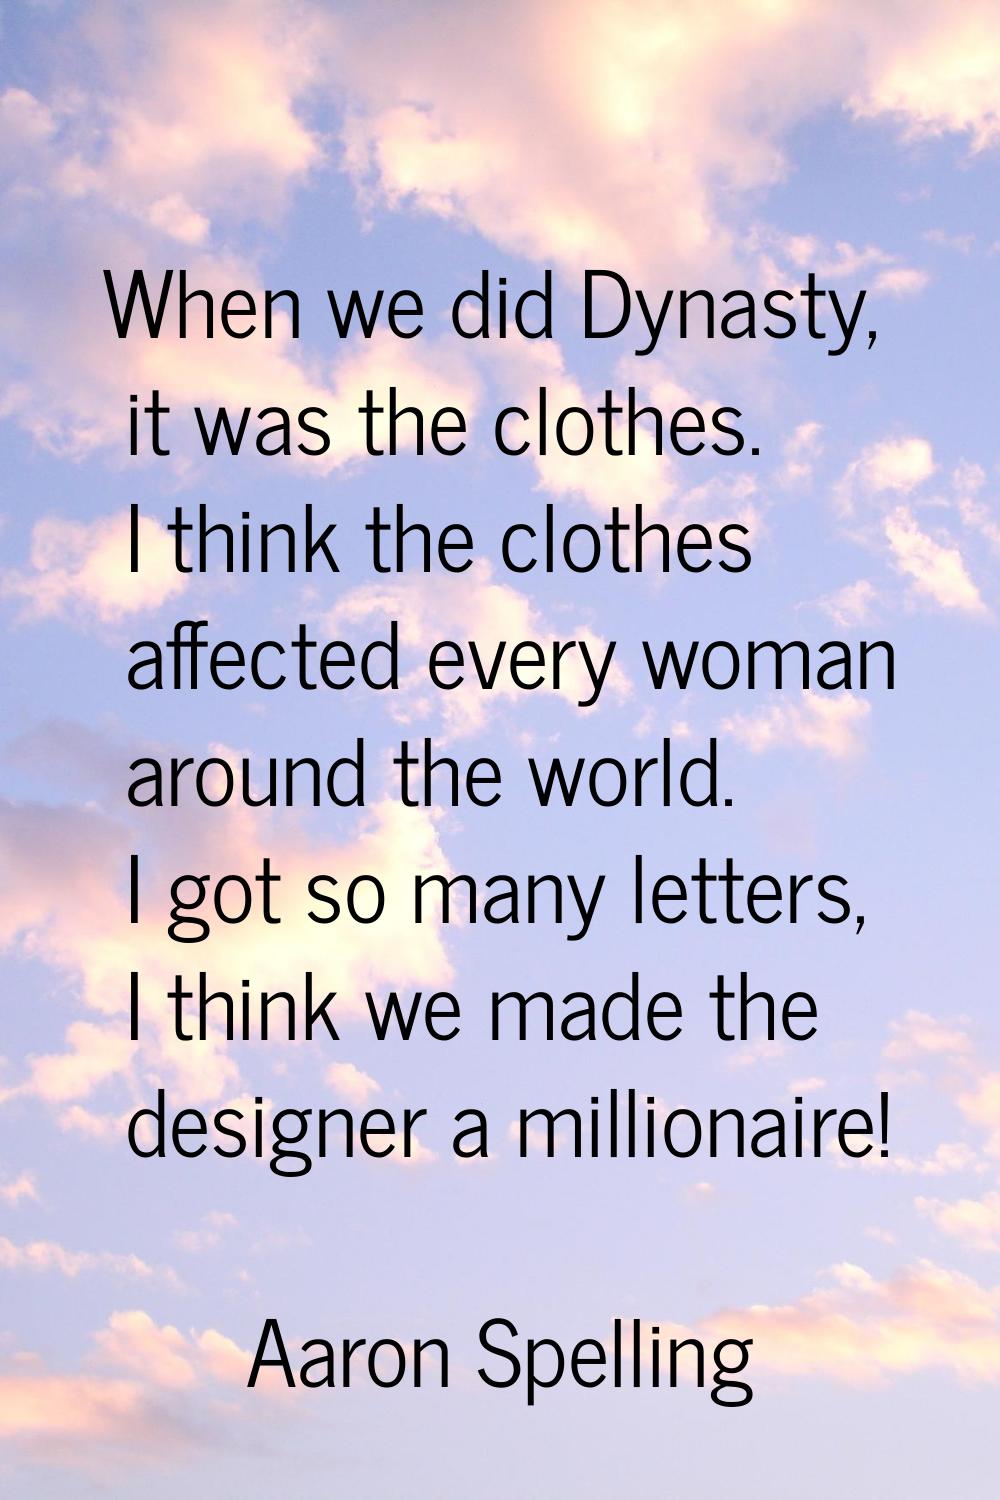 When we did Dynasty, it was the clothes. I think the clothes affected every woman around the world.